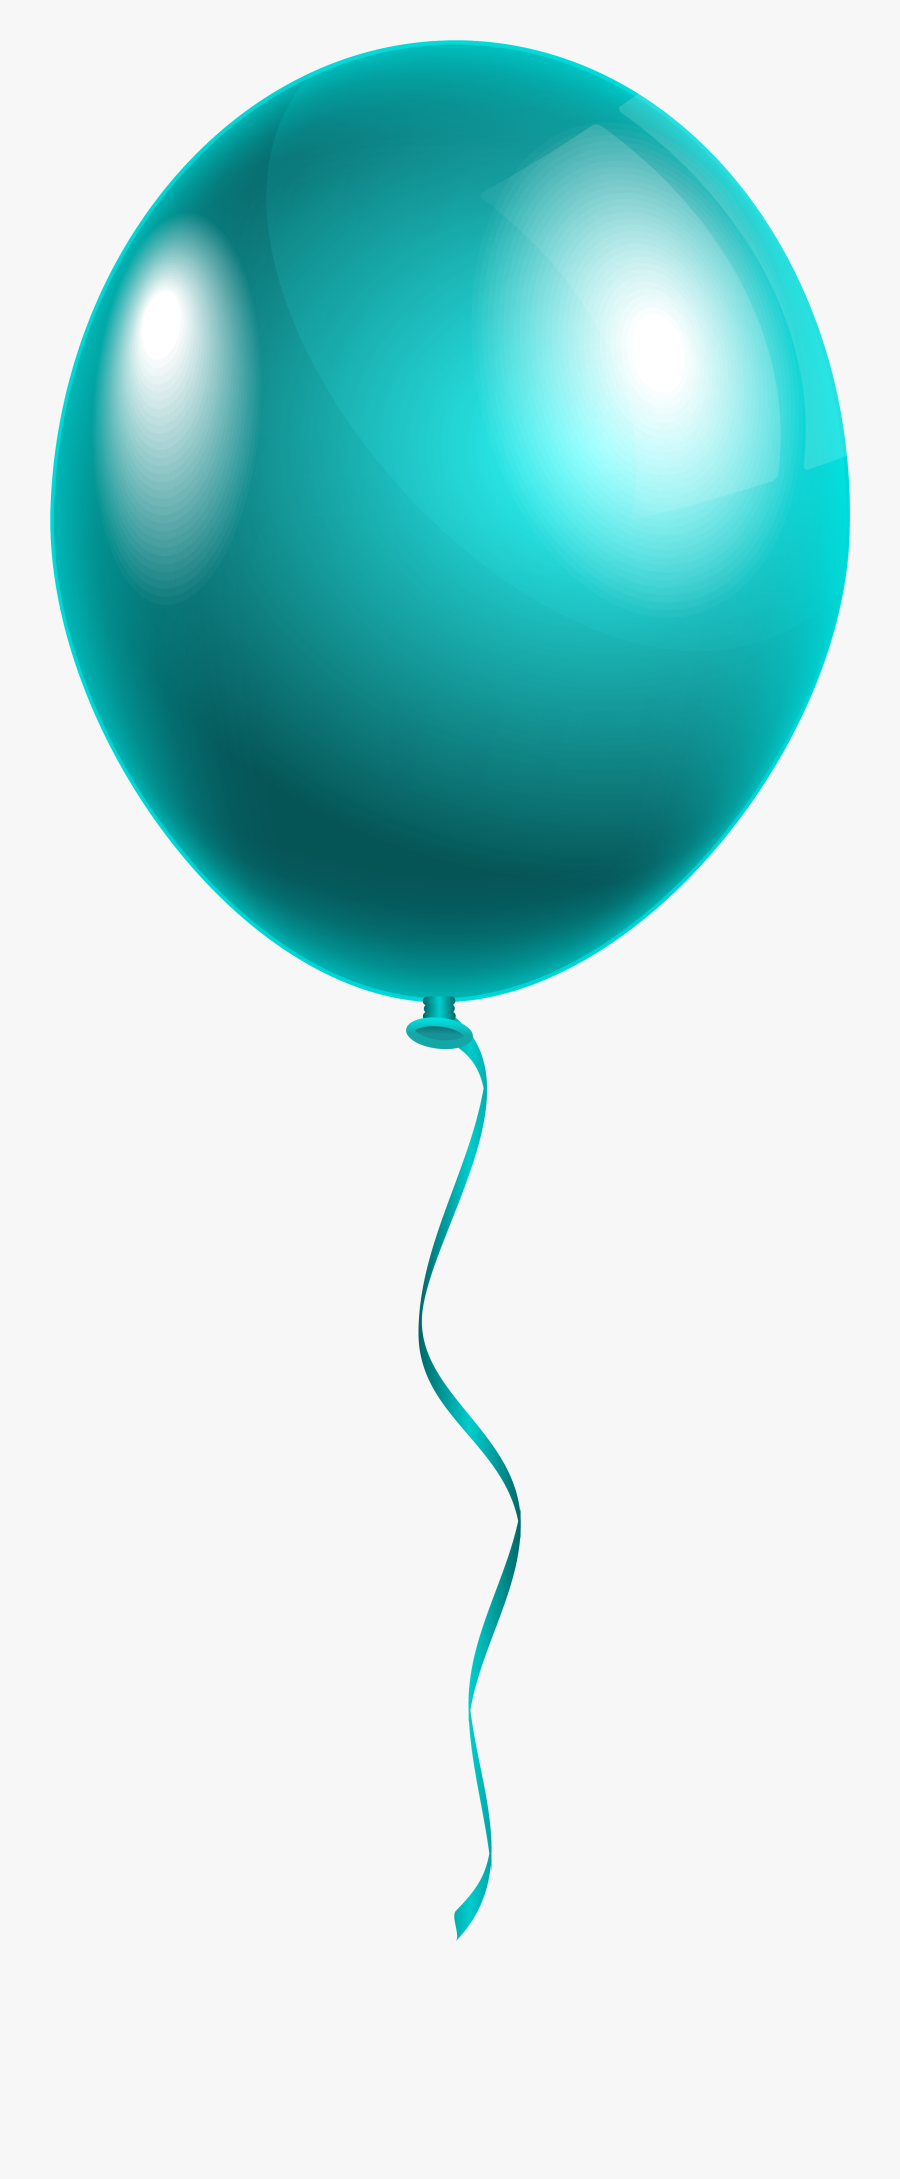 Single Modern Blue Balloon Png Clipart Image - Single Balloon Transparent Background, Transparent Clipart